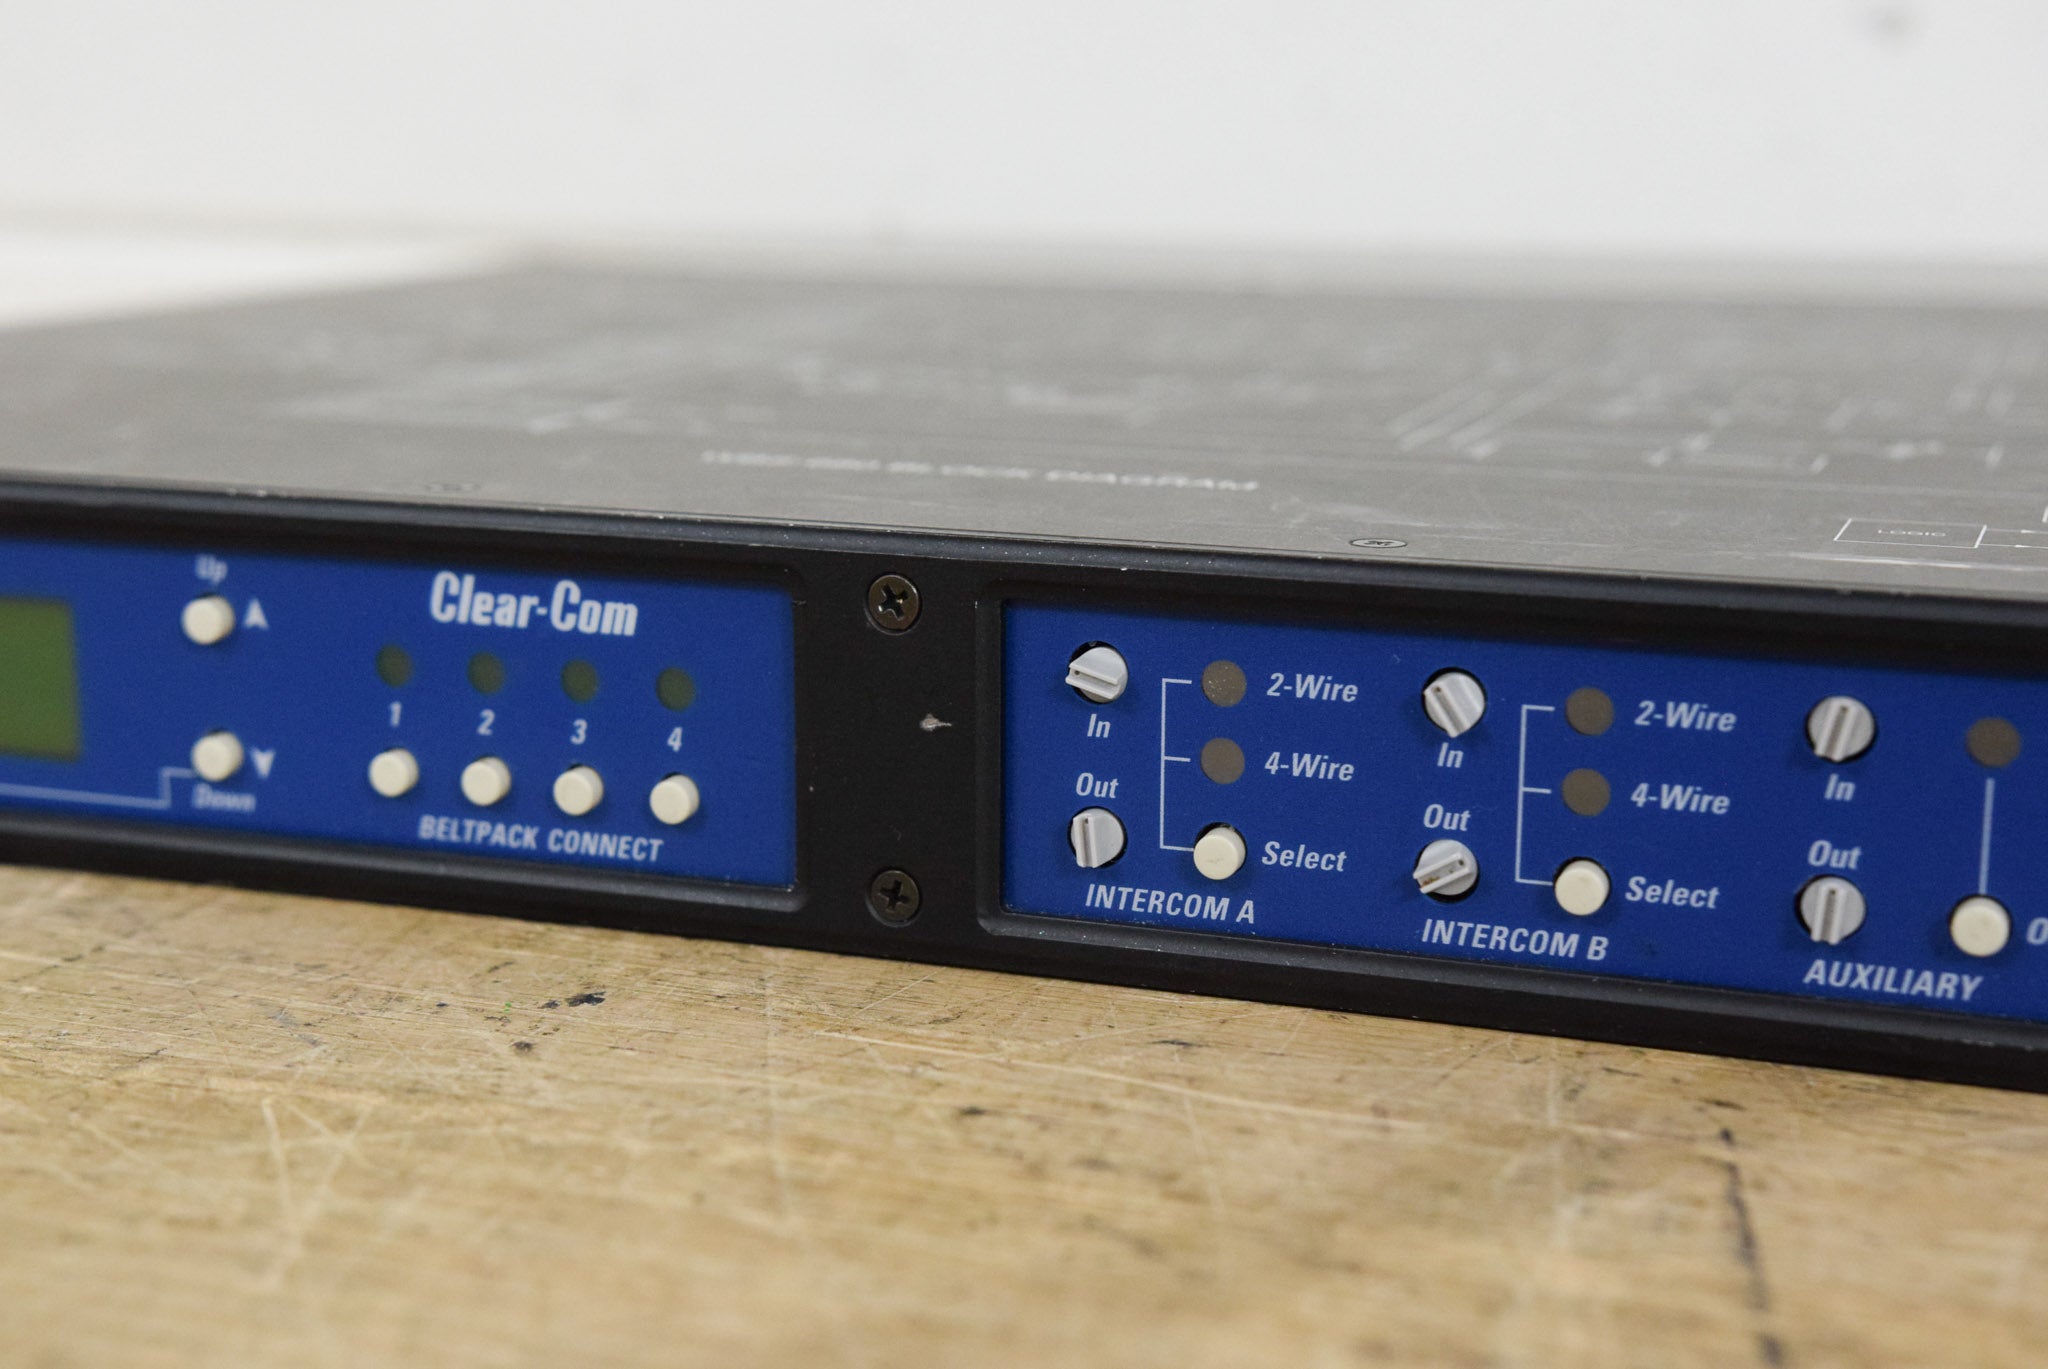 Clear-Com WBS-680 Two-channel UHF Wireless Base Station